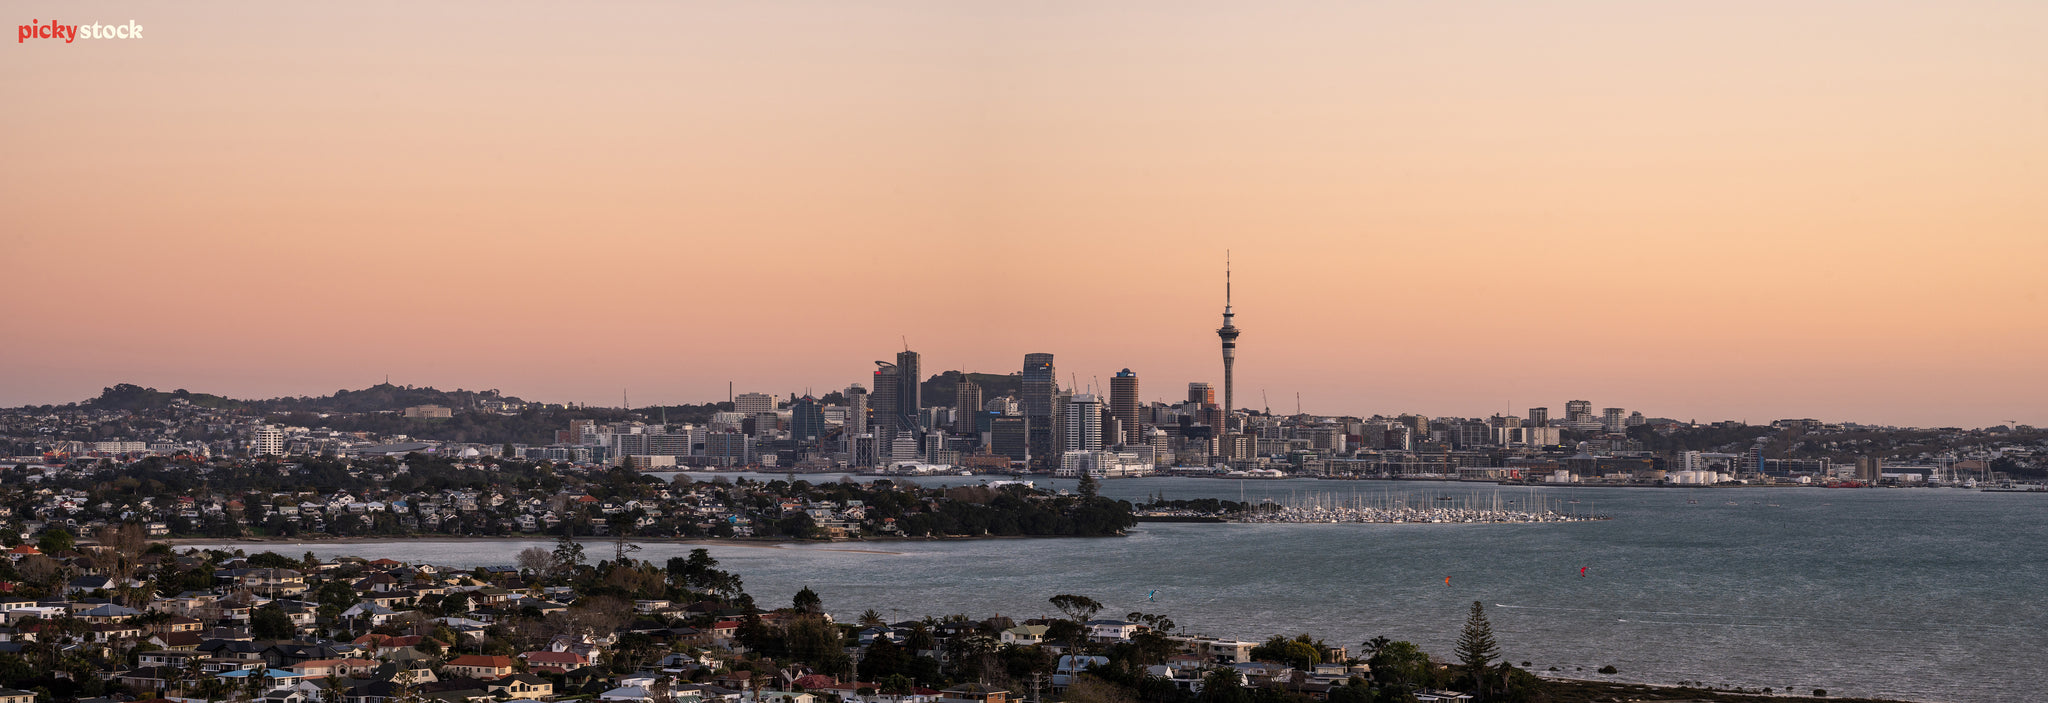 Panorama of Auckland City at sunset, as seen from a higher viewpoint than the city. The sky is changing to a pinky / orange as there are no clouds in sight. 